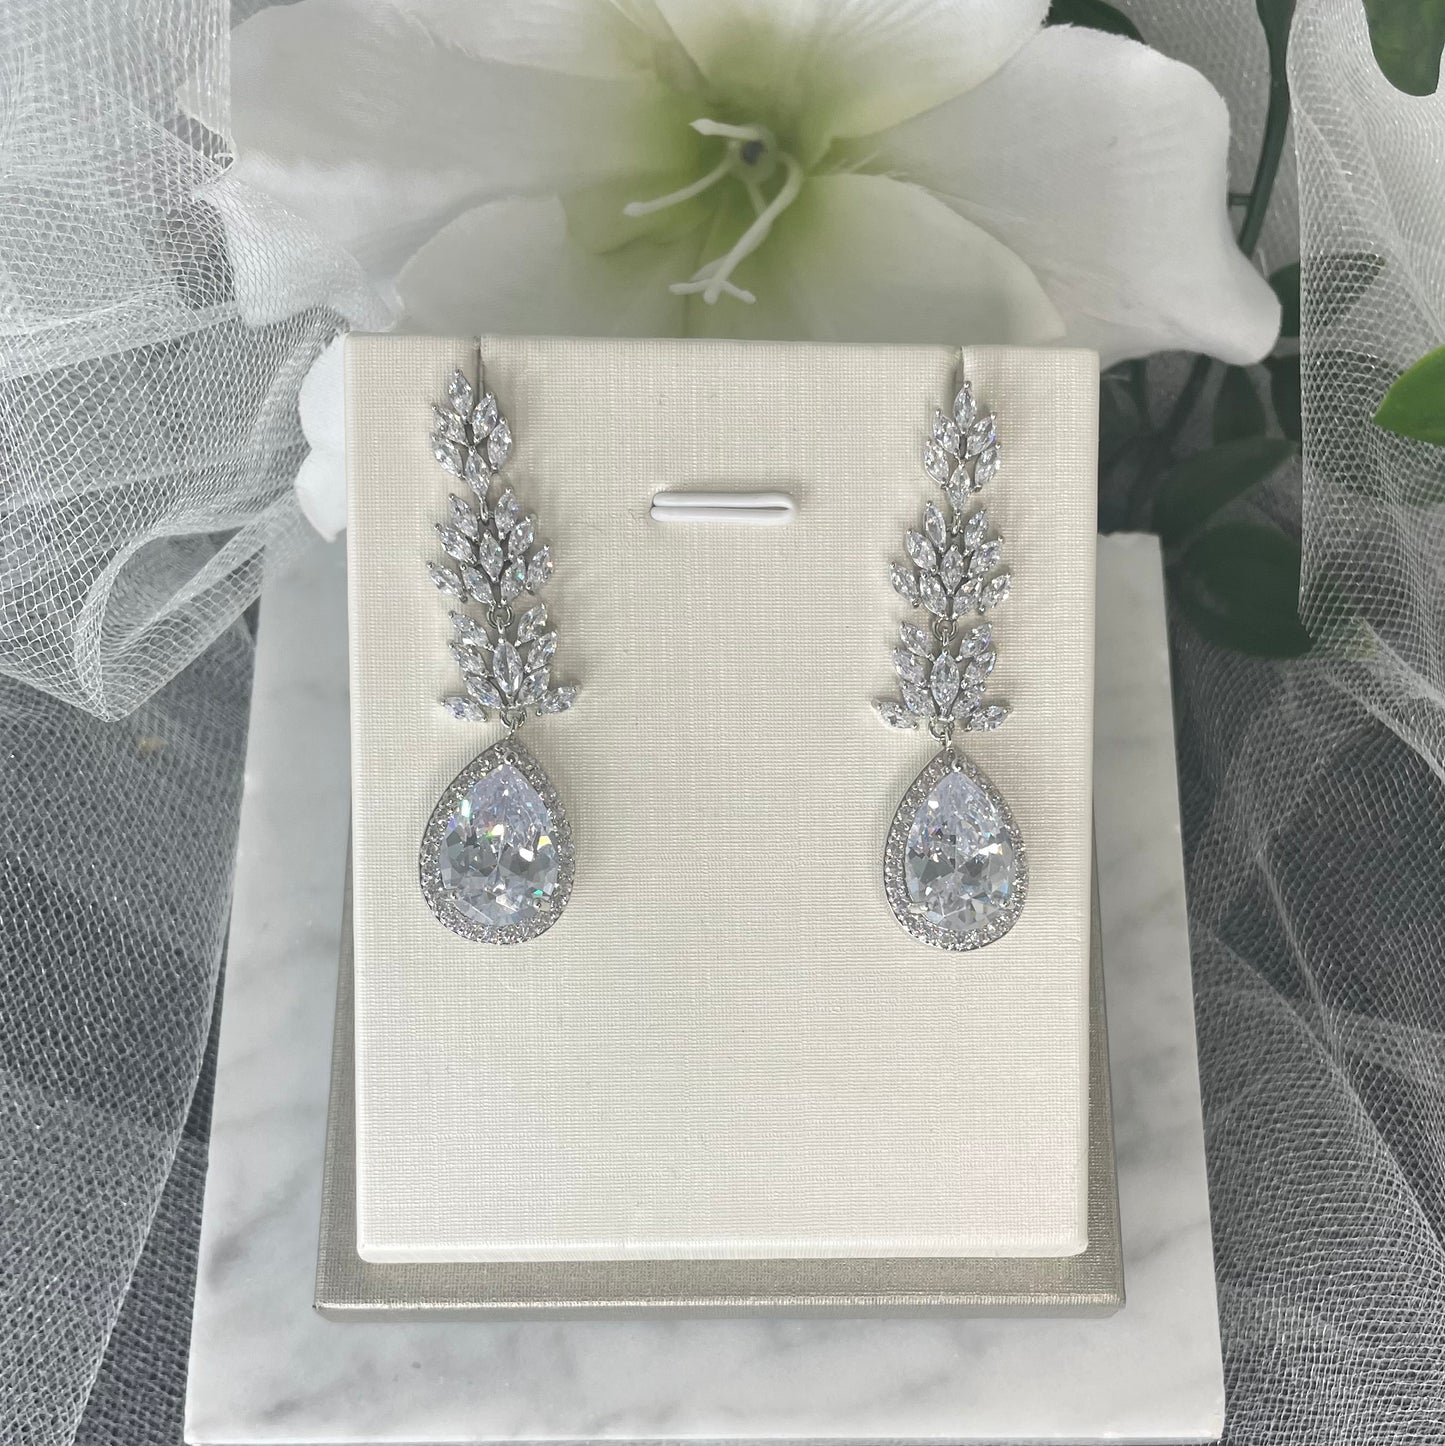 Madonna leaf-design crystal earrings with teardrop centrepiece and diamanté cubic zirconia accents.